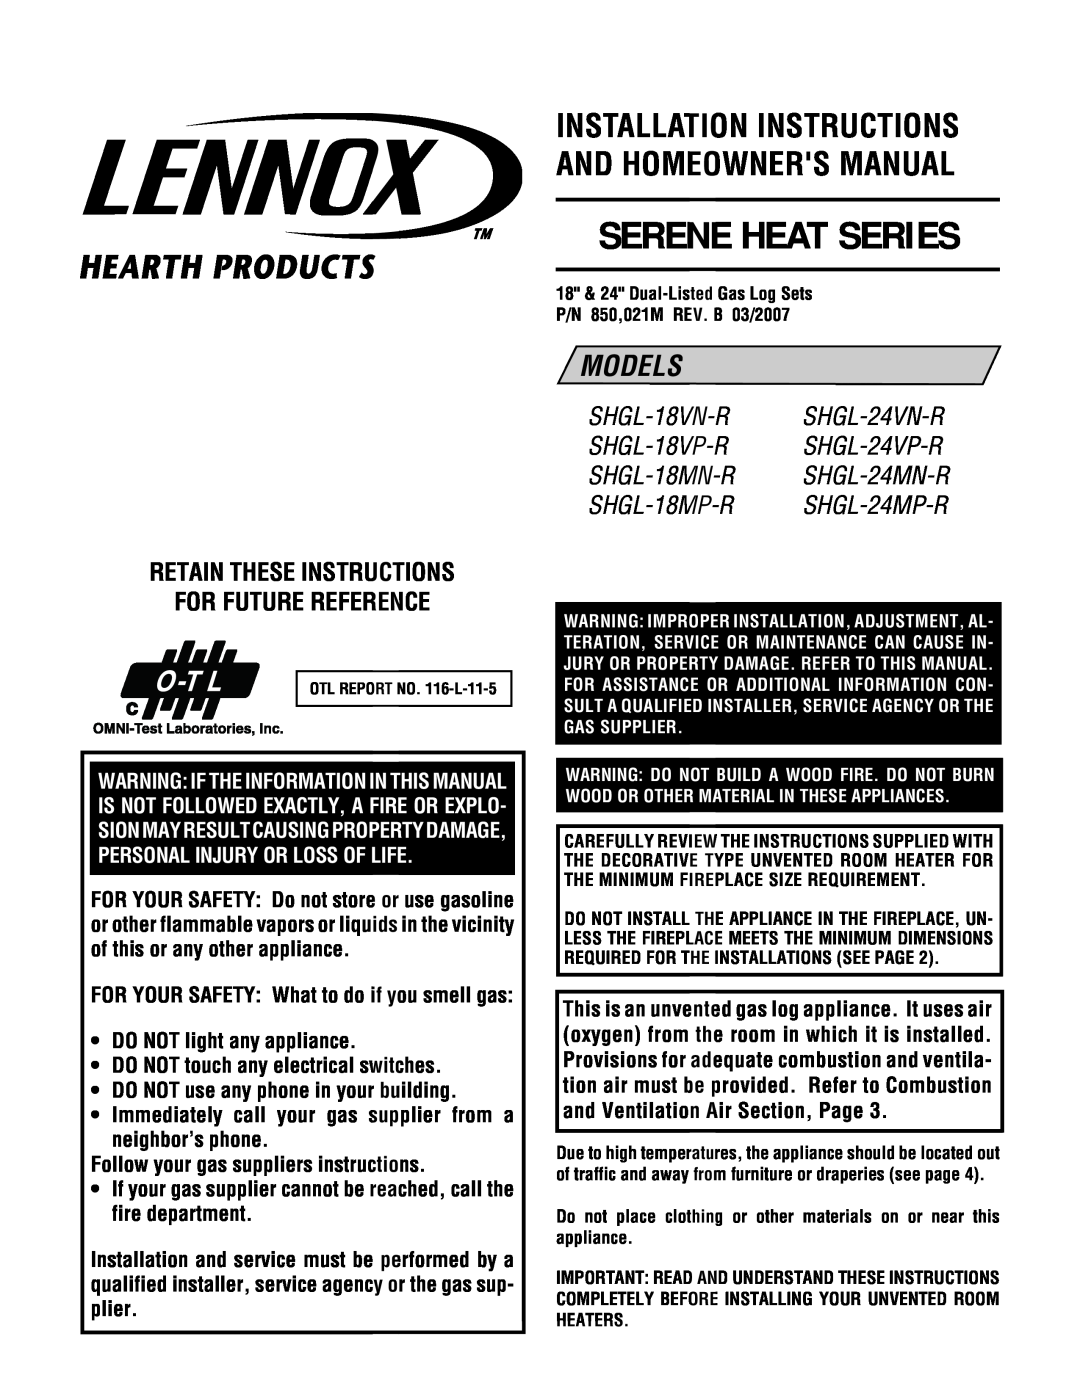 Lennox Hearth SHGL-24MP-R dimensions Retain These Instructions For Future Reference, DO NOT light any appliance, Models 